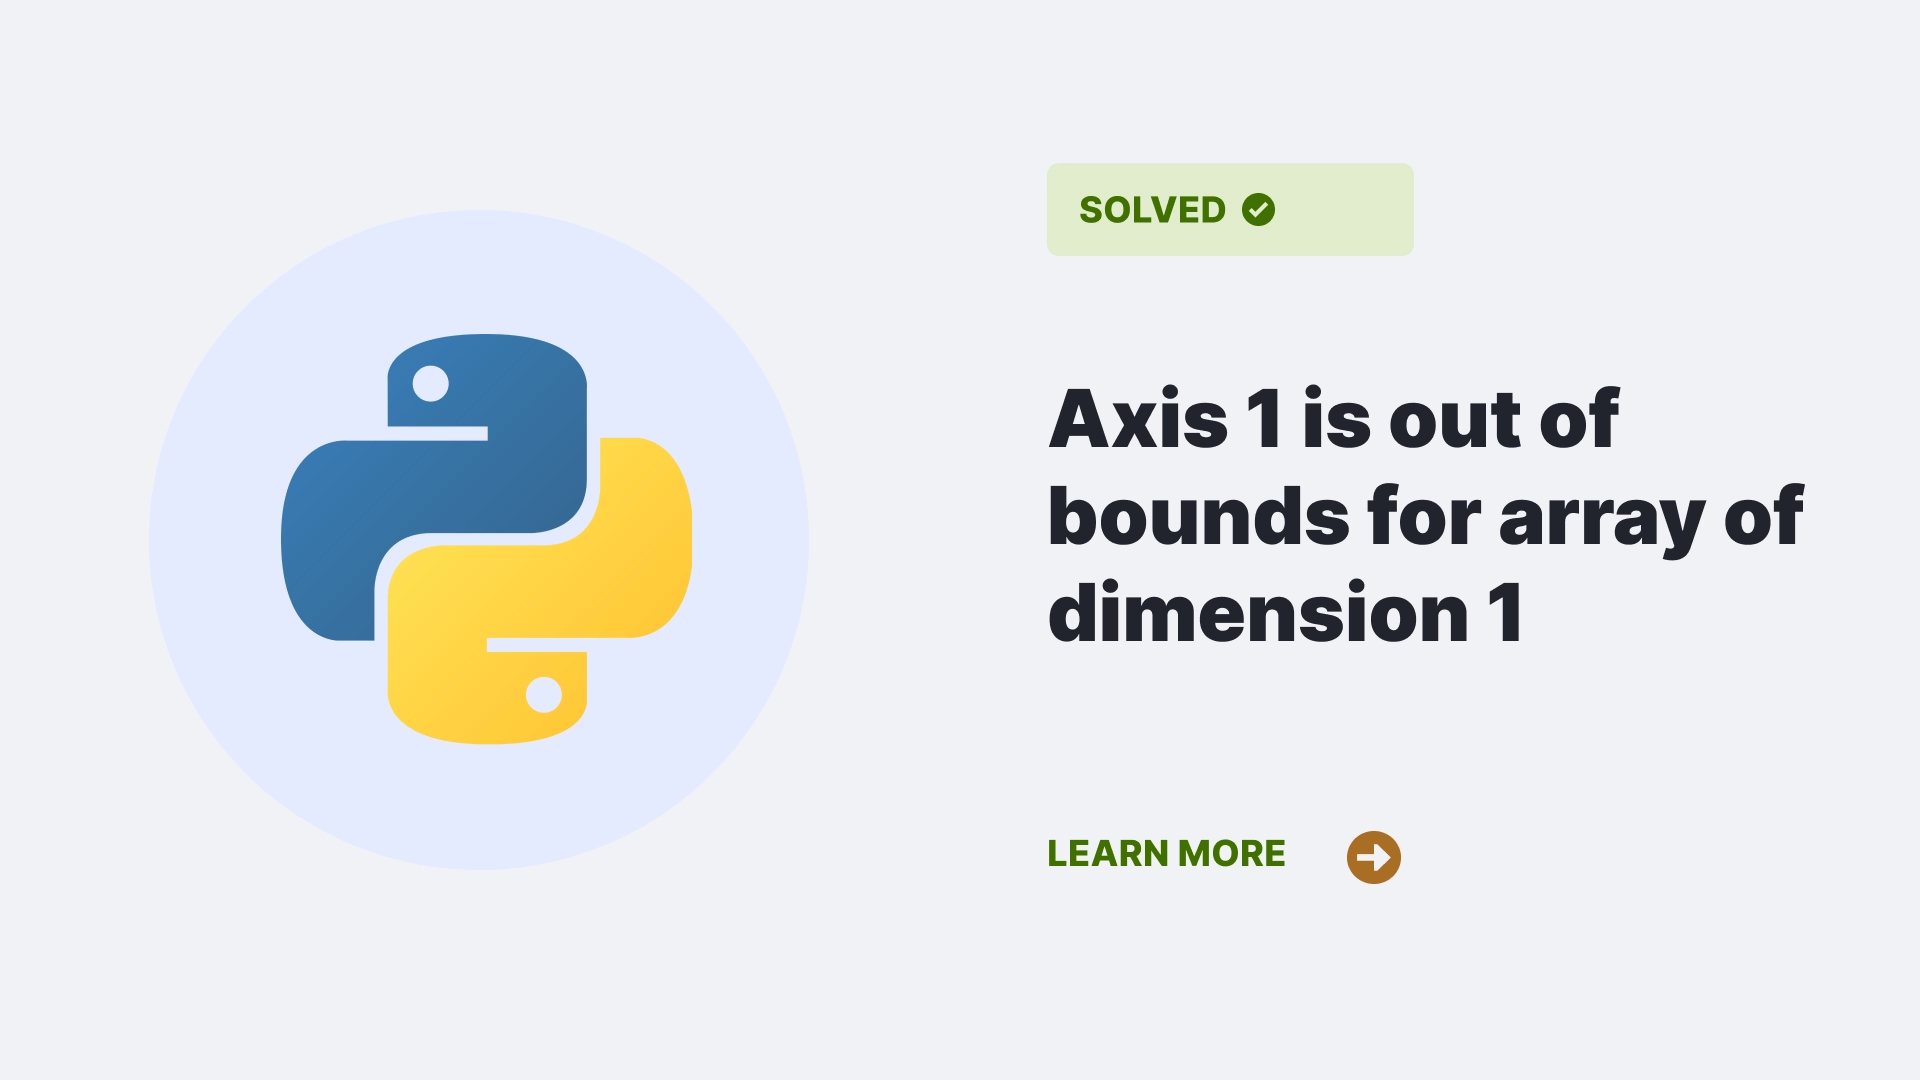 Axis 1 is out of bounds for array of dimension 1